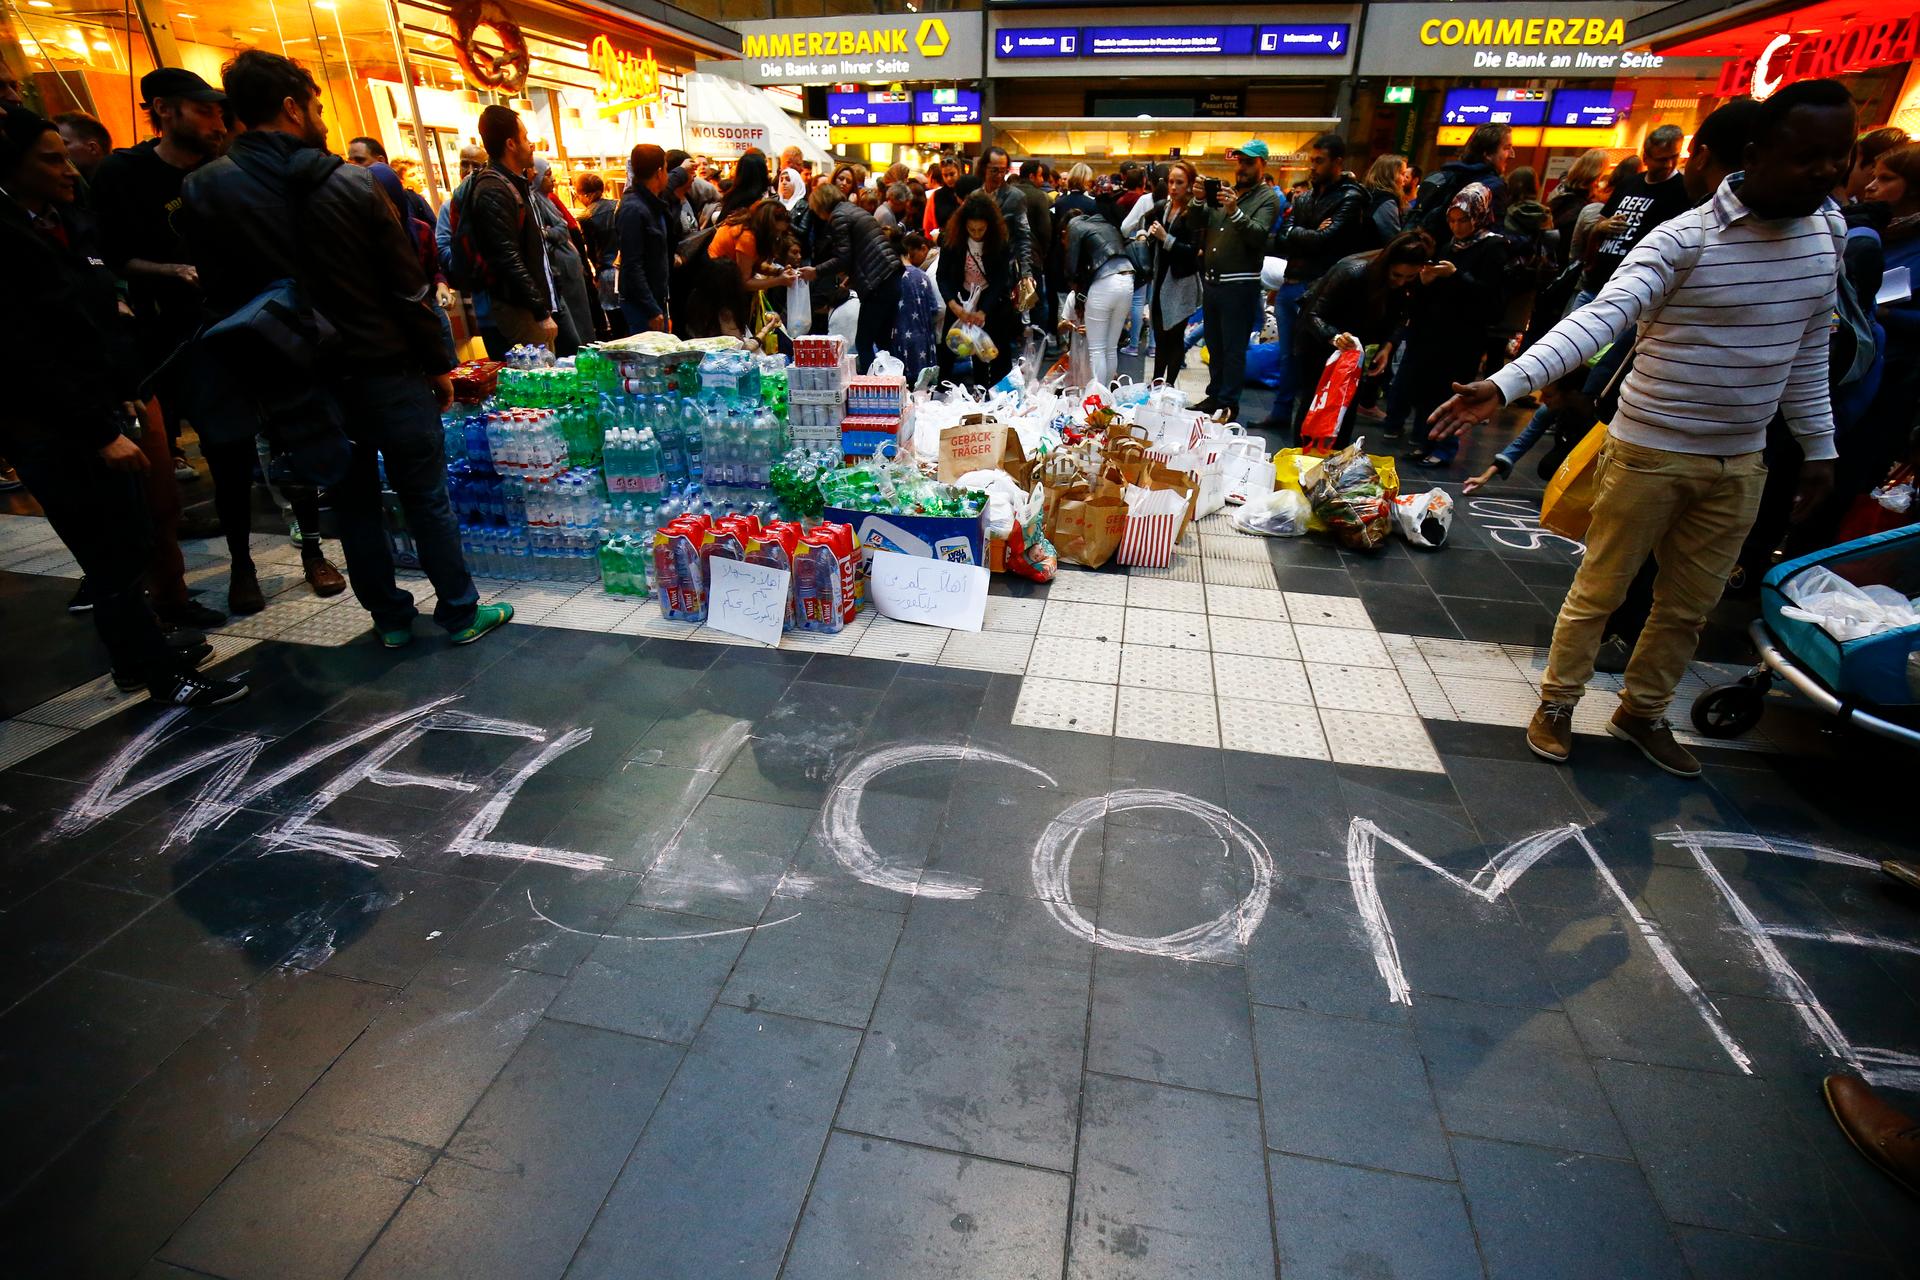 Water, food, and a welcome sign greeted refugees who reached Frankfurt, Germany